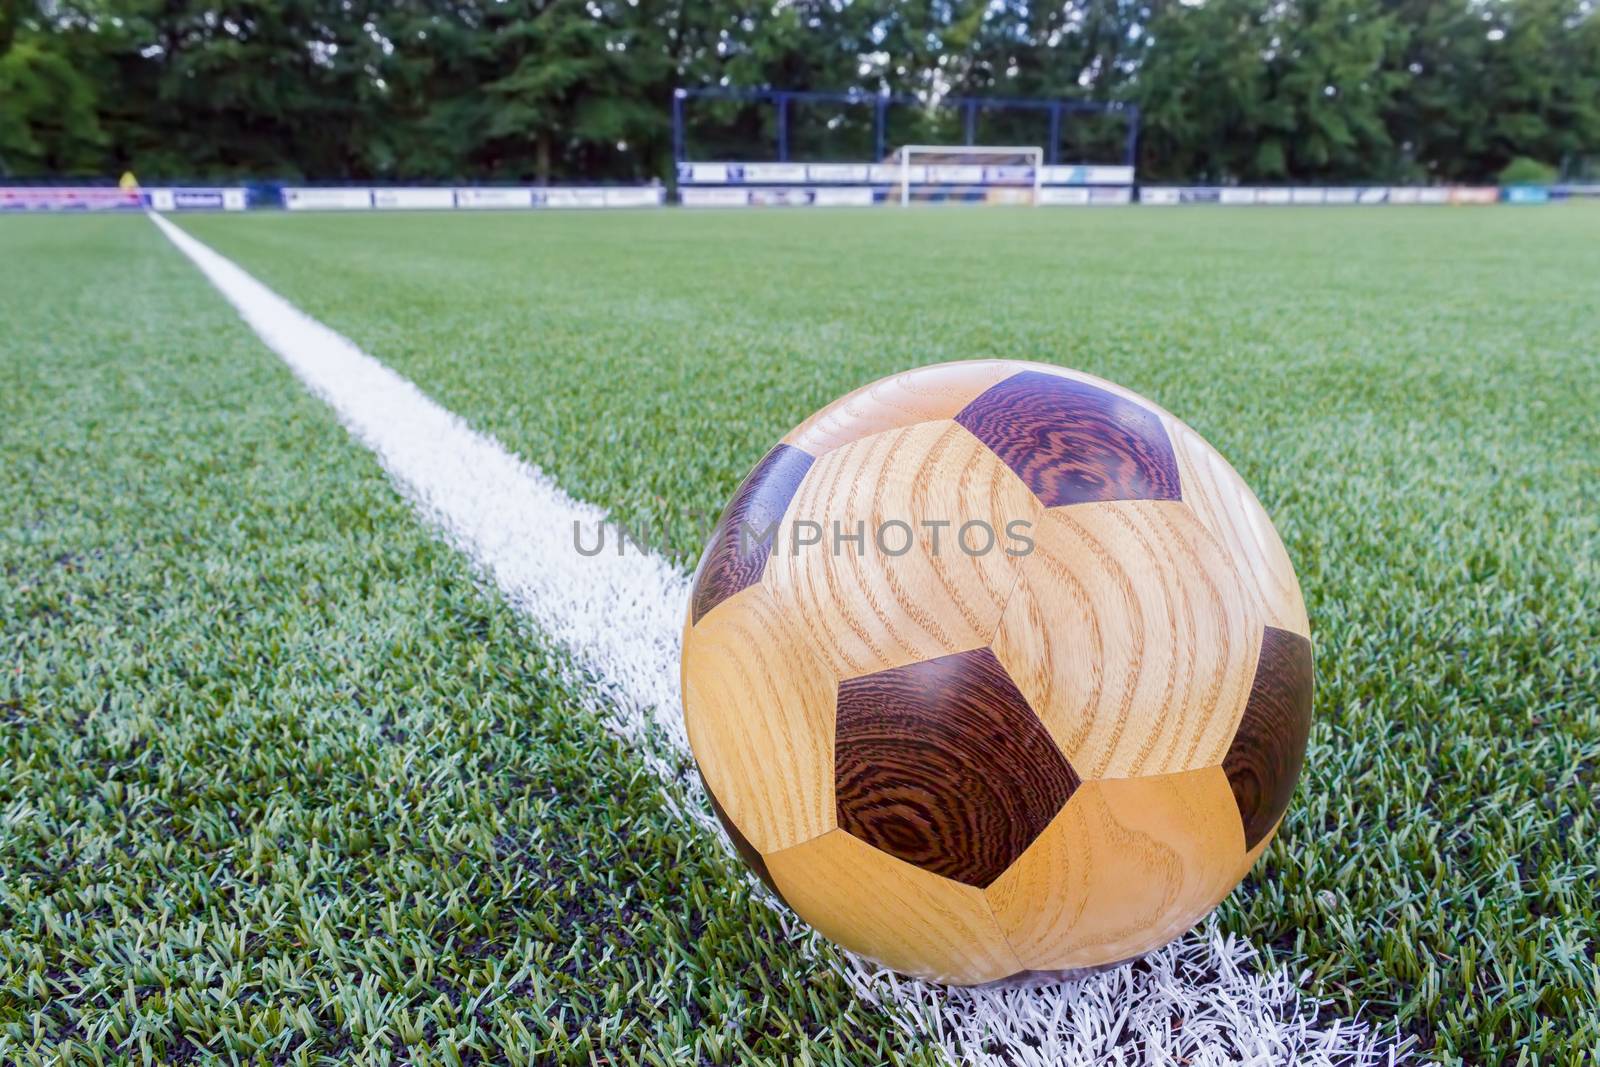 Wooden football lying on sideline with goal in background